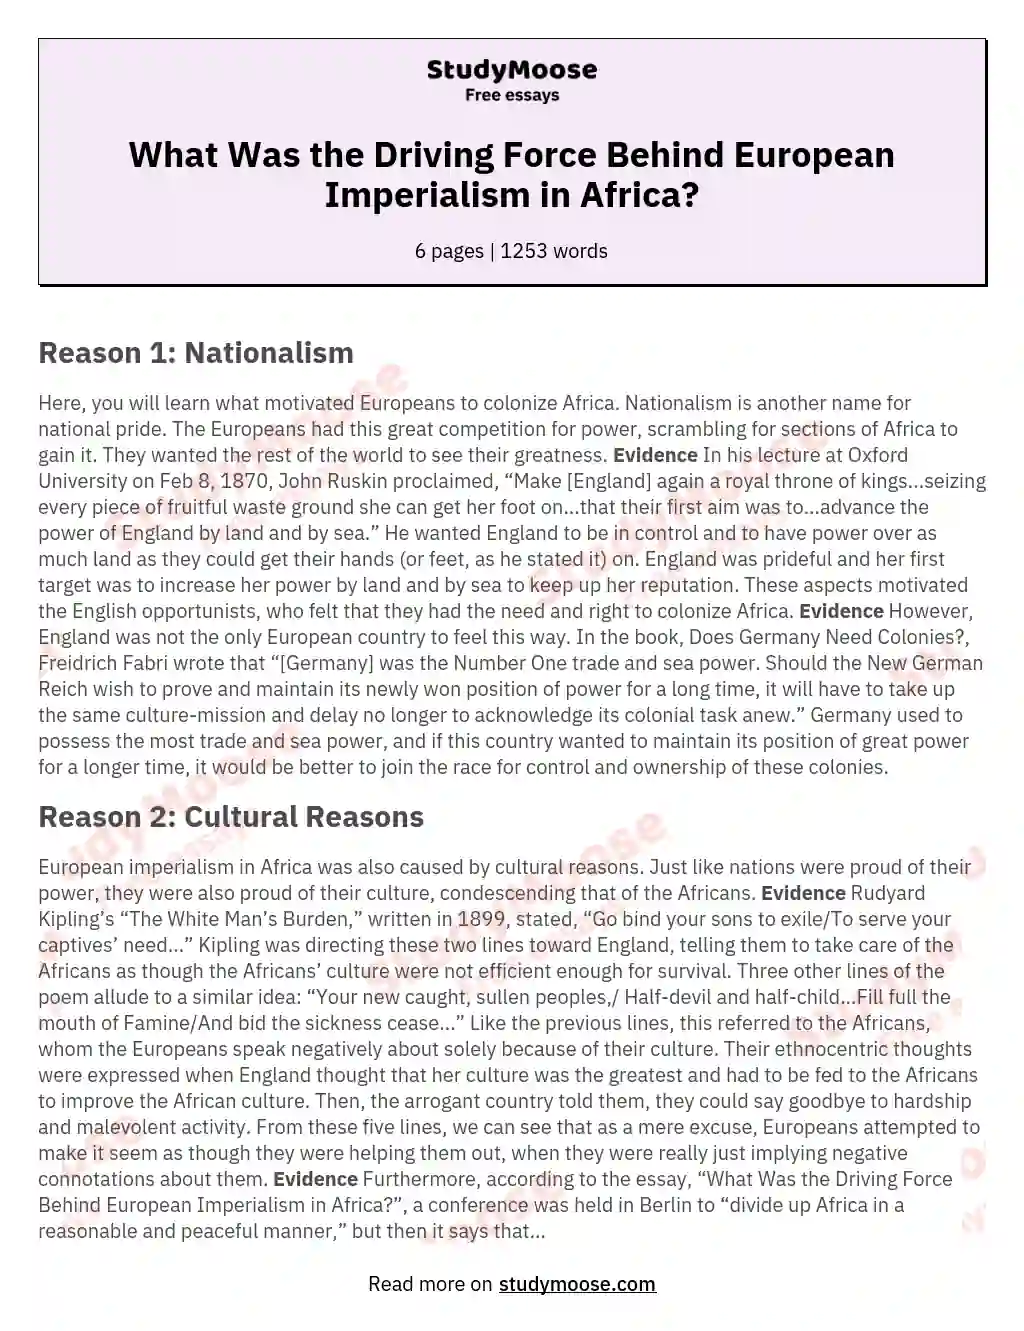 what was the driving force behind european imperialism in africa dbq essay answers